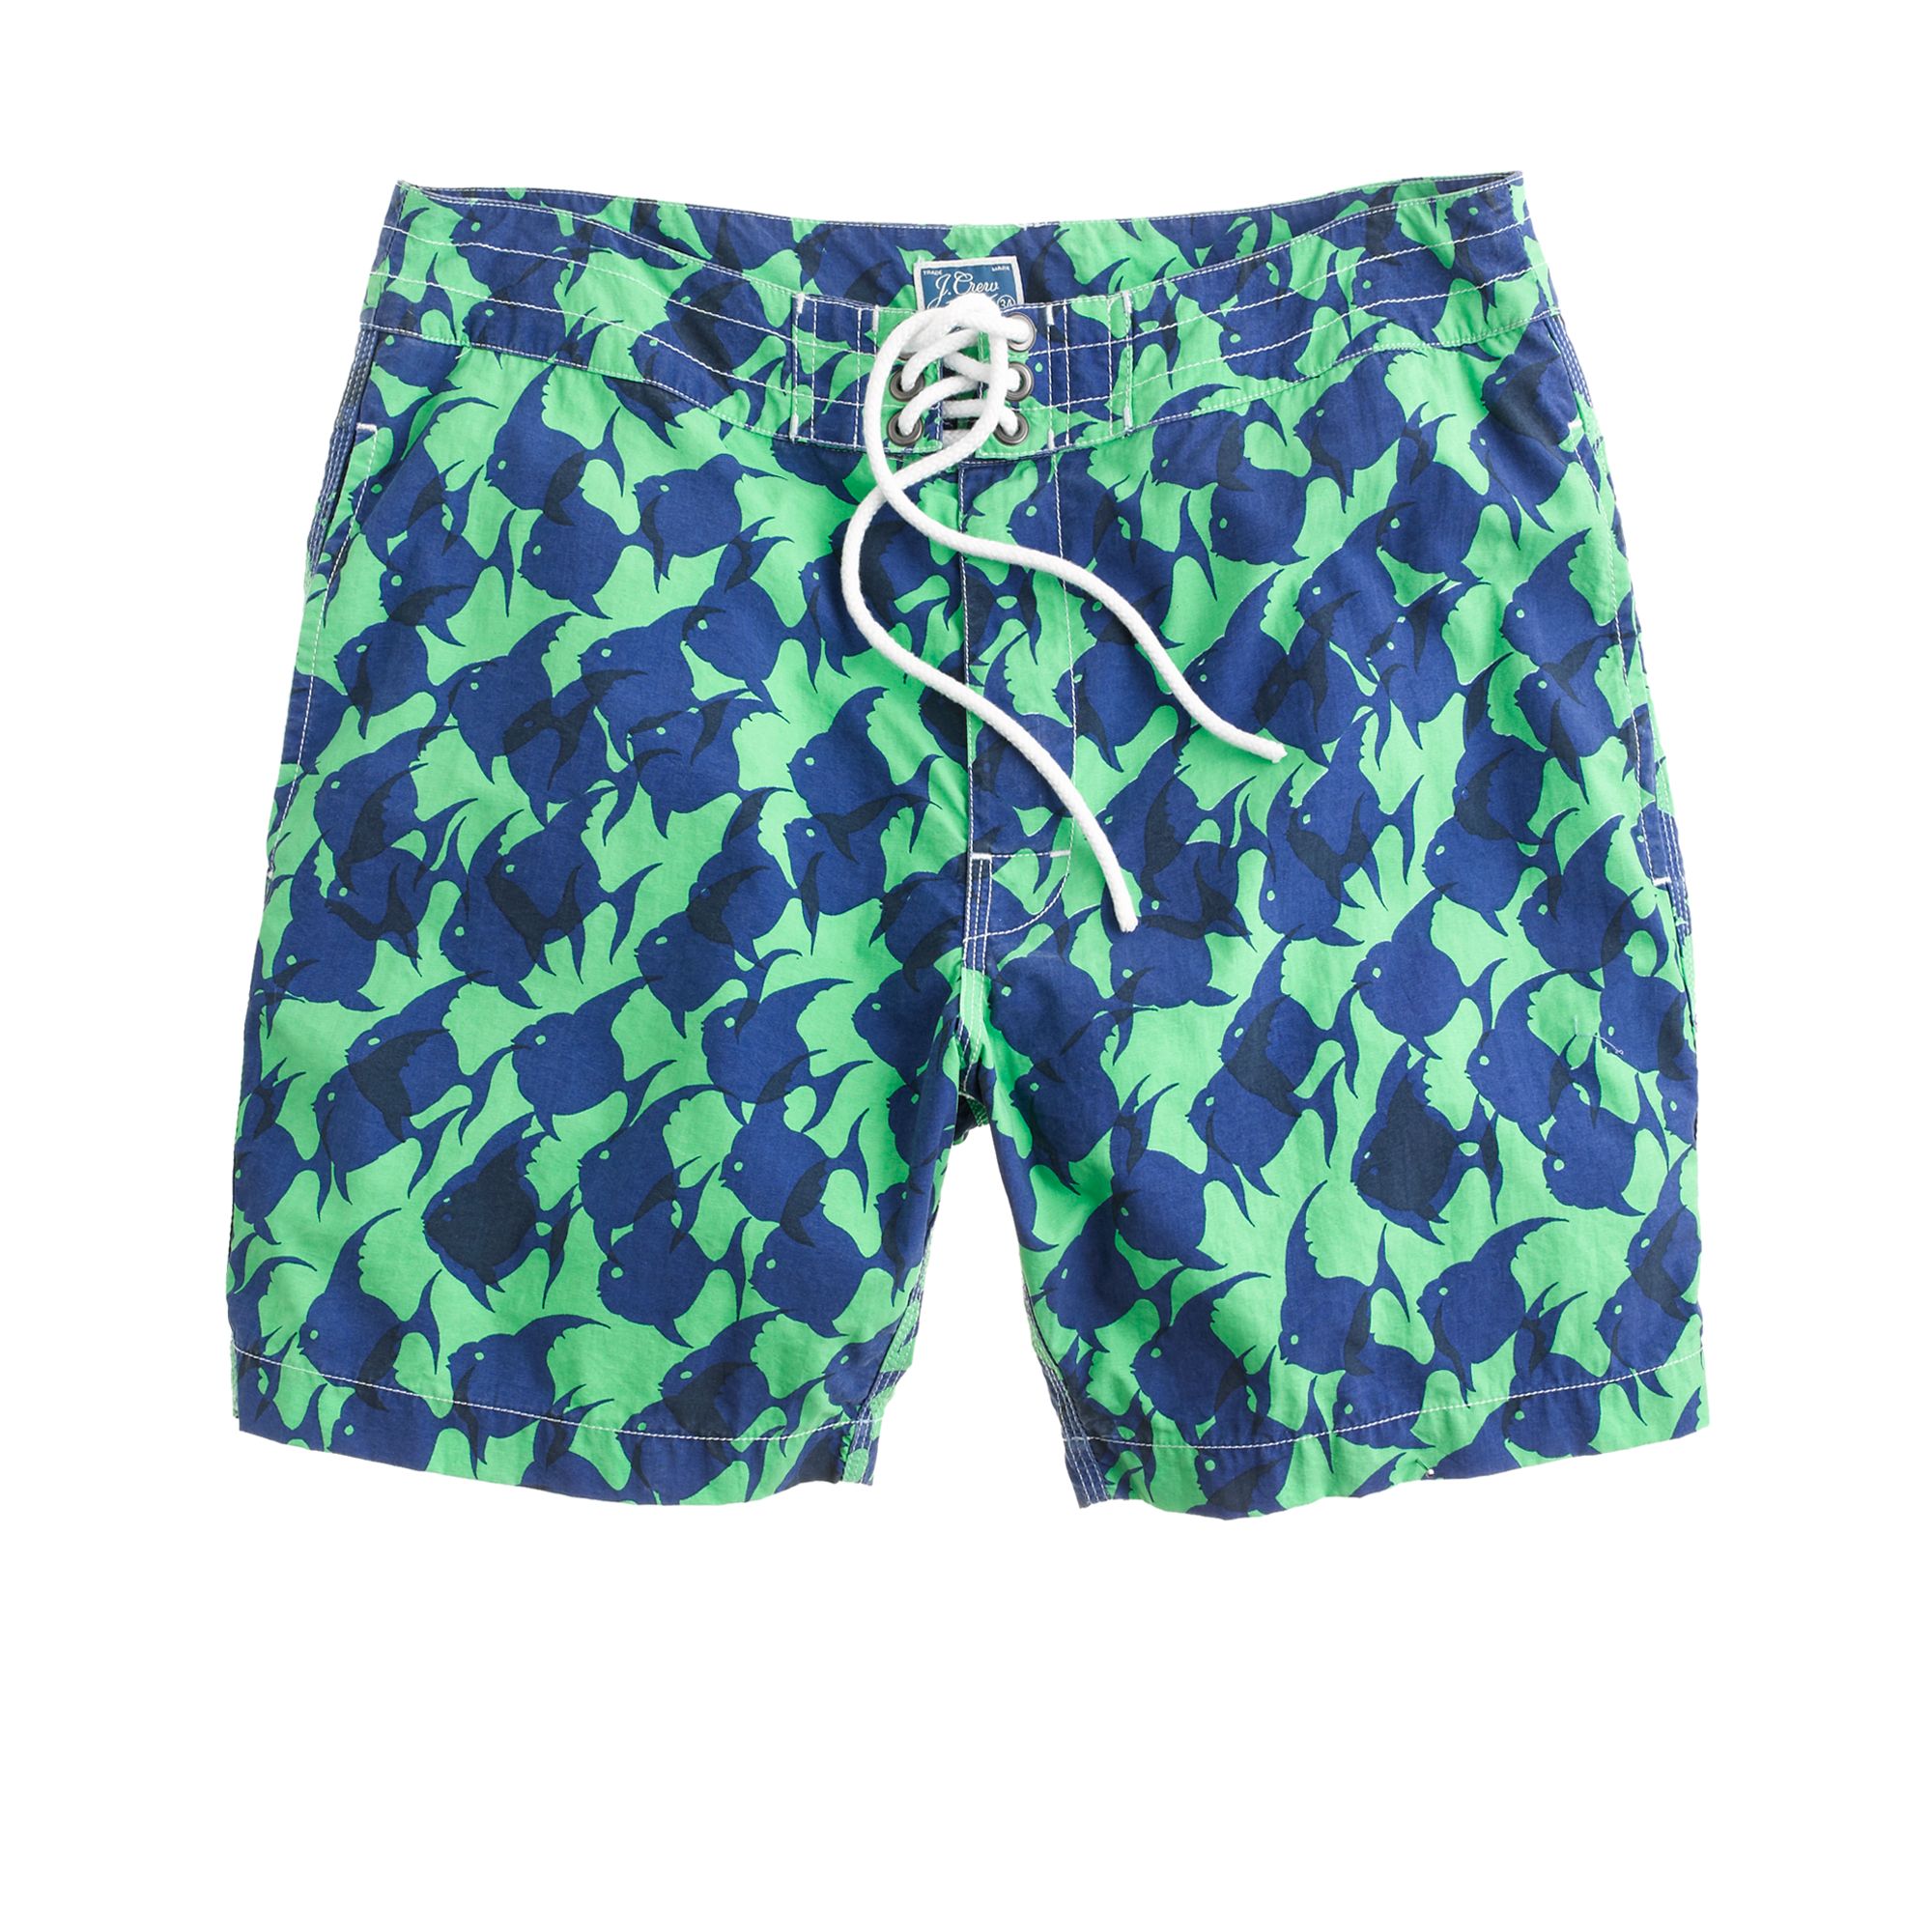 J.Crew 7 Board Shorts in Tropical Fish in Lime Green (Green) for Men - Lyst